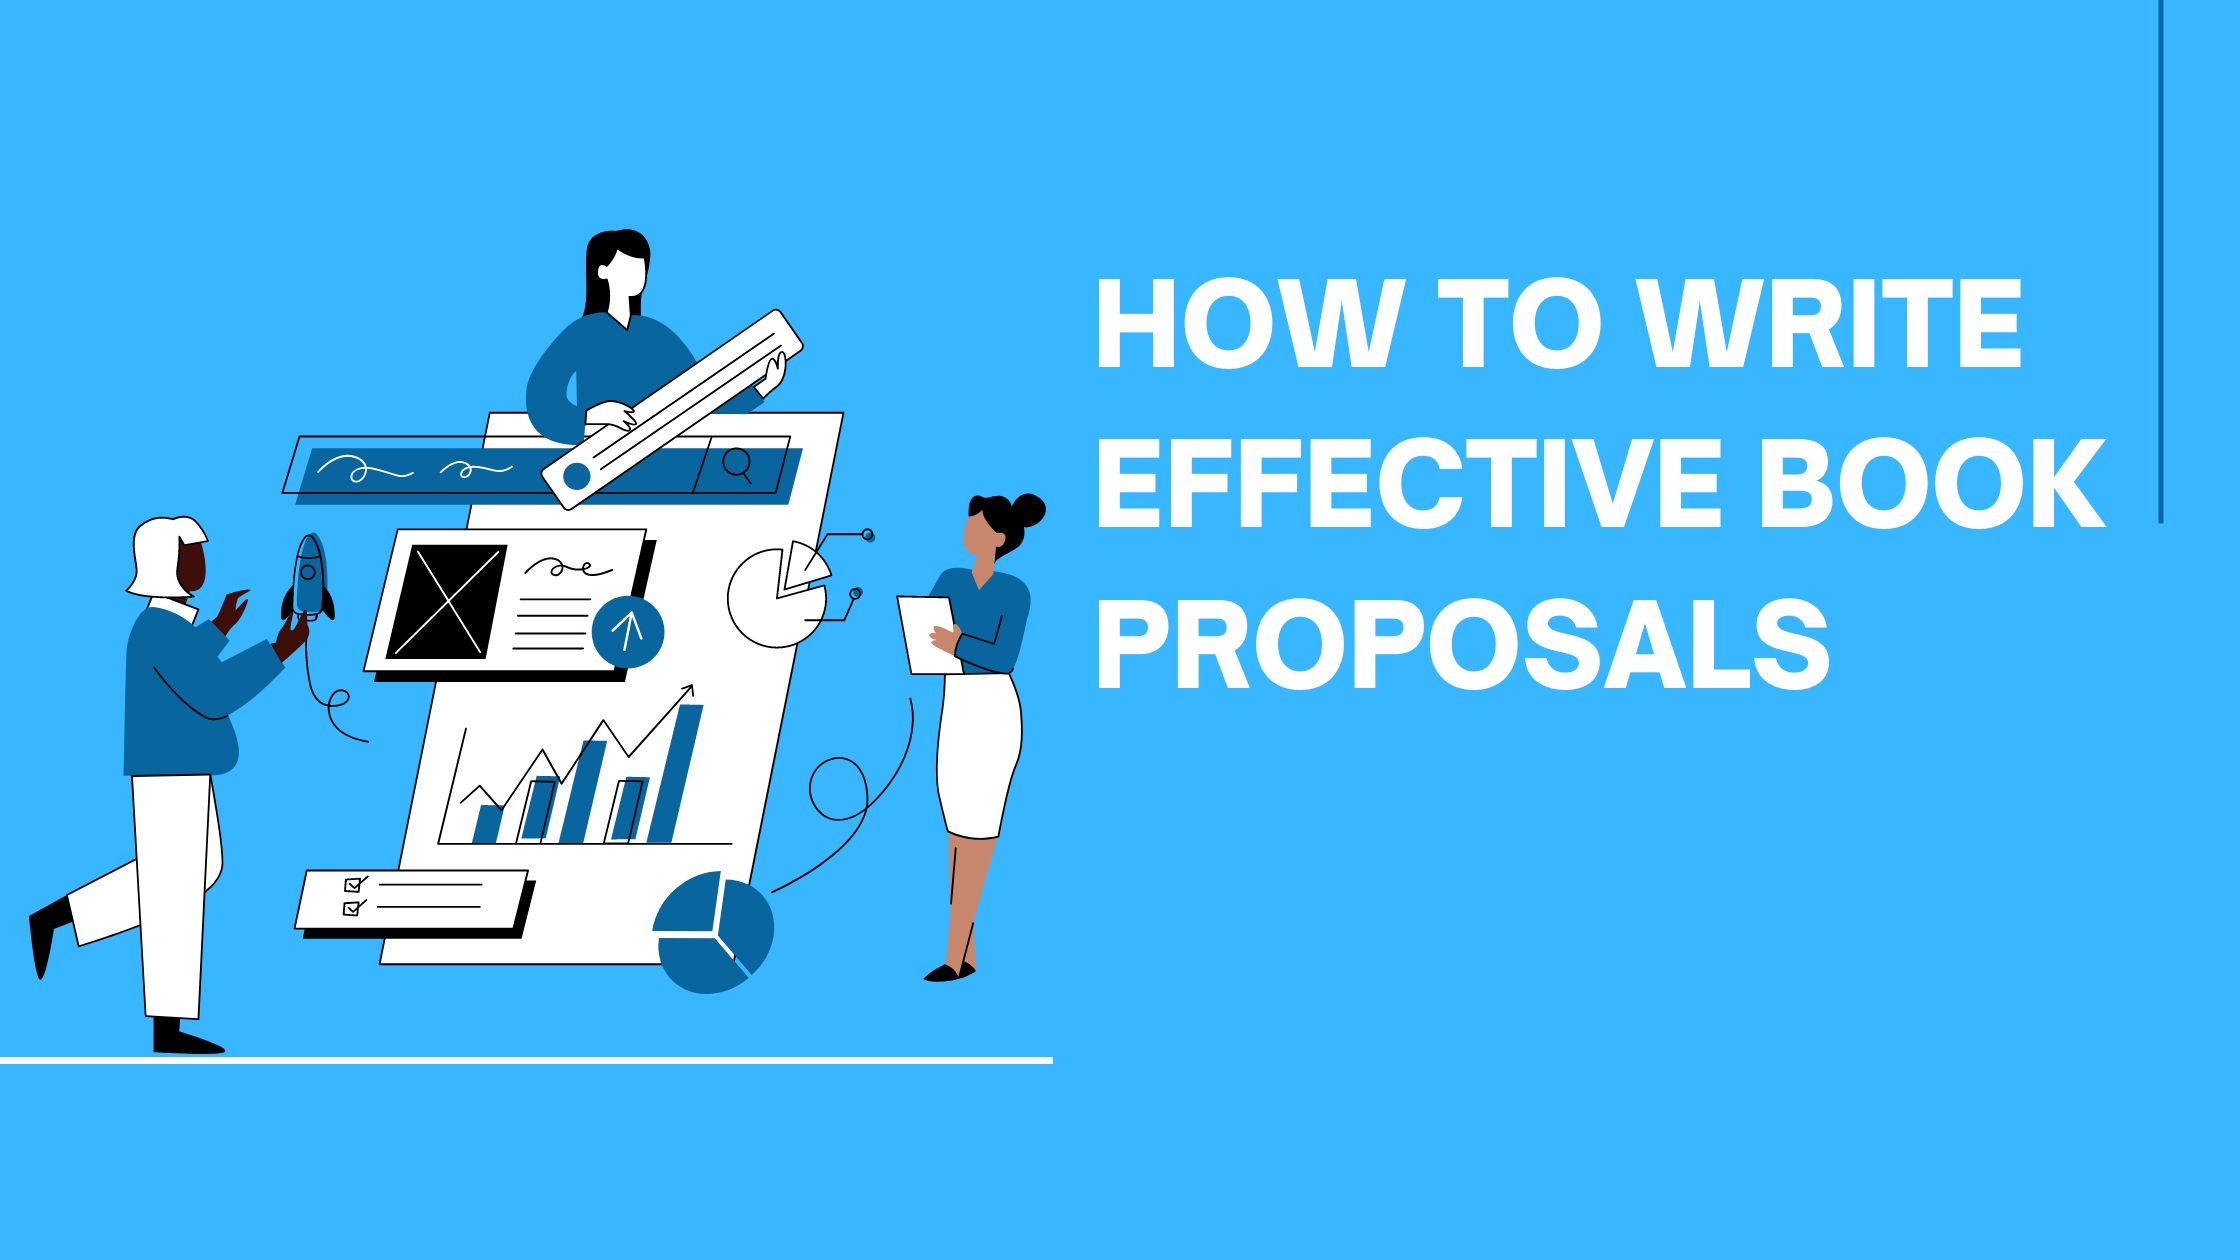 How to write effective book proposals